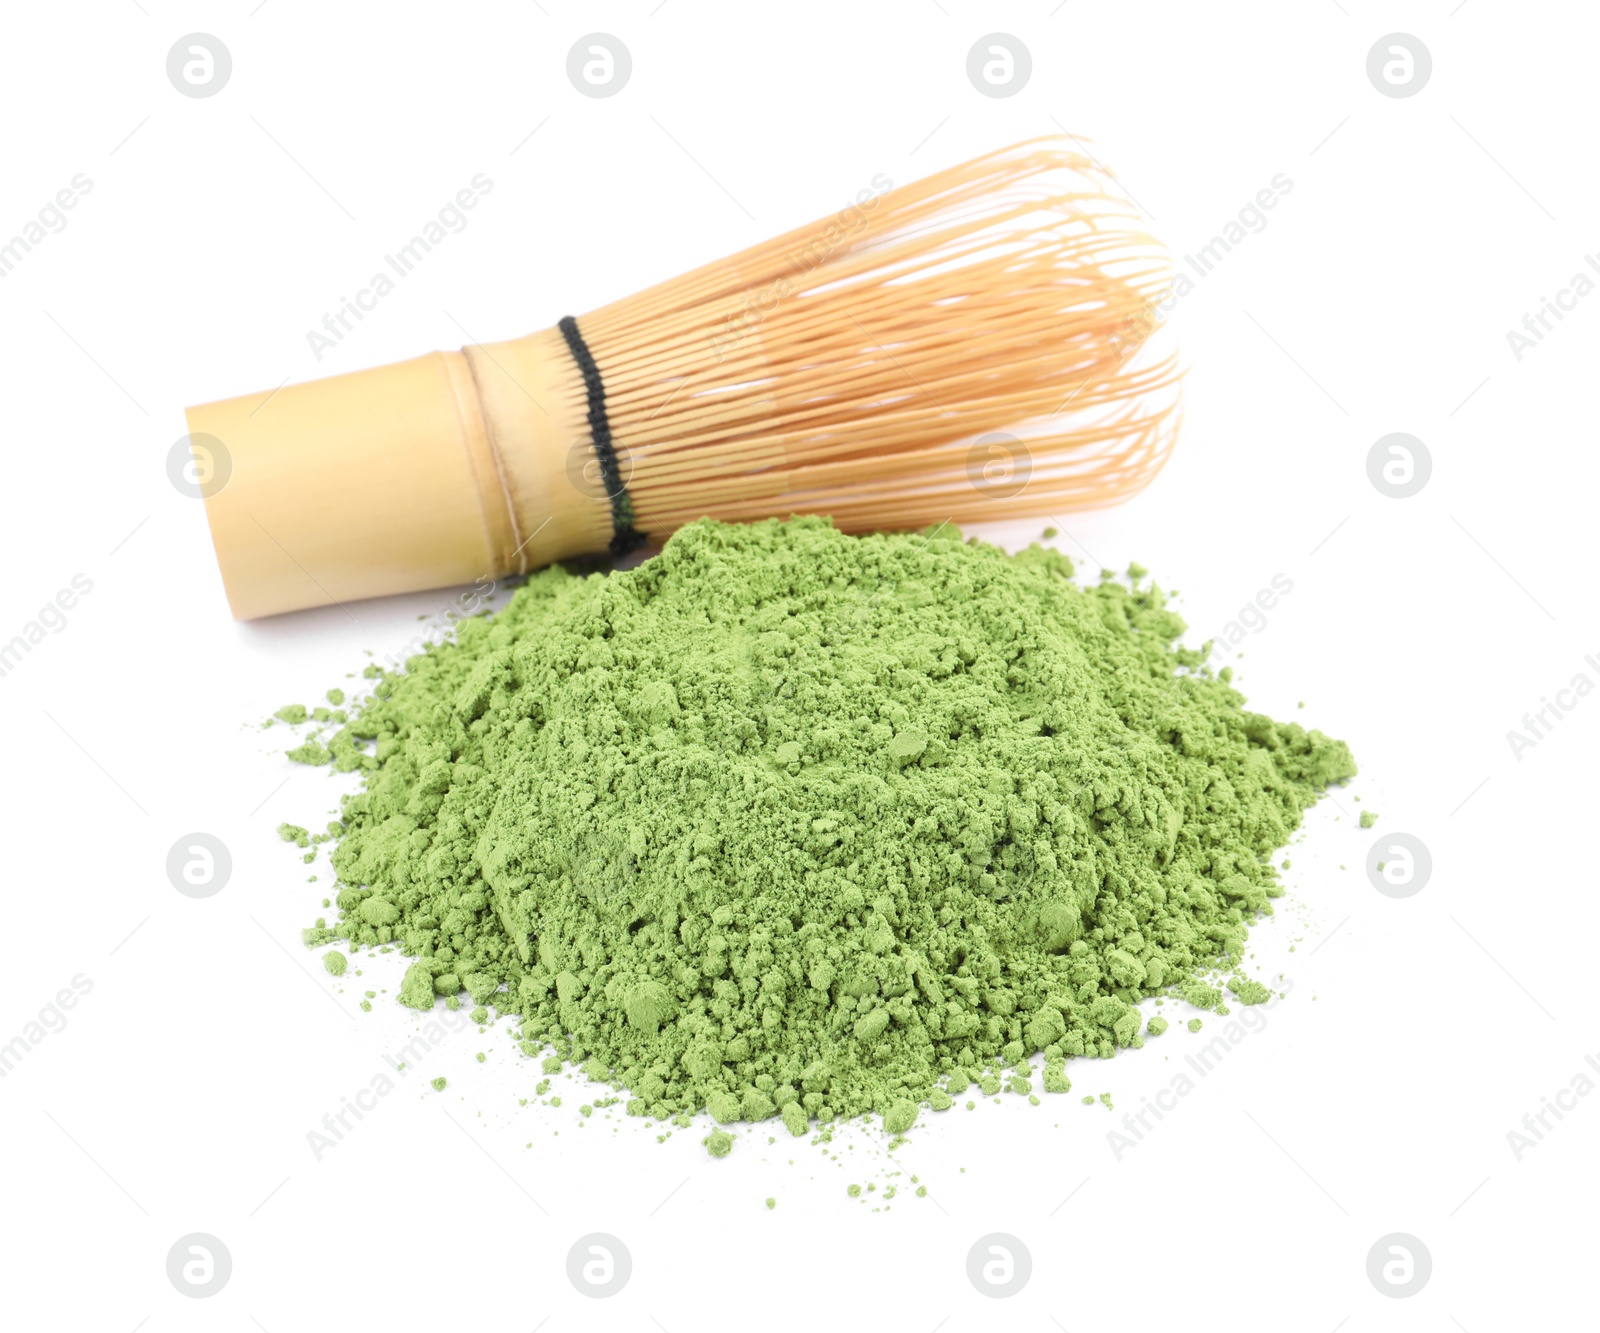 Photo of Pile of green matcha powder and bamboo whisk isolated on white